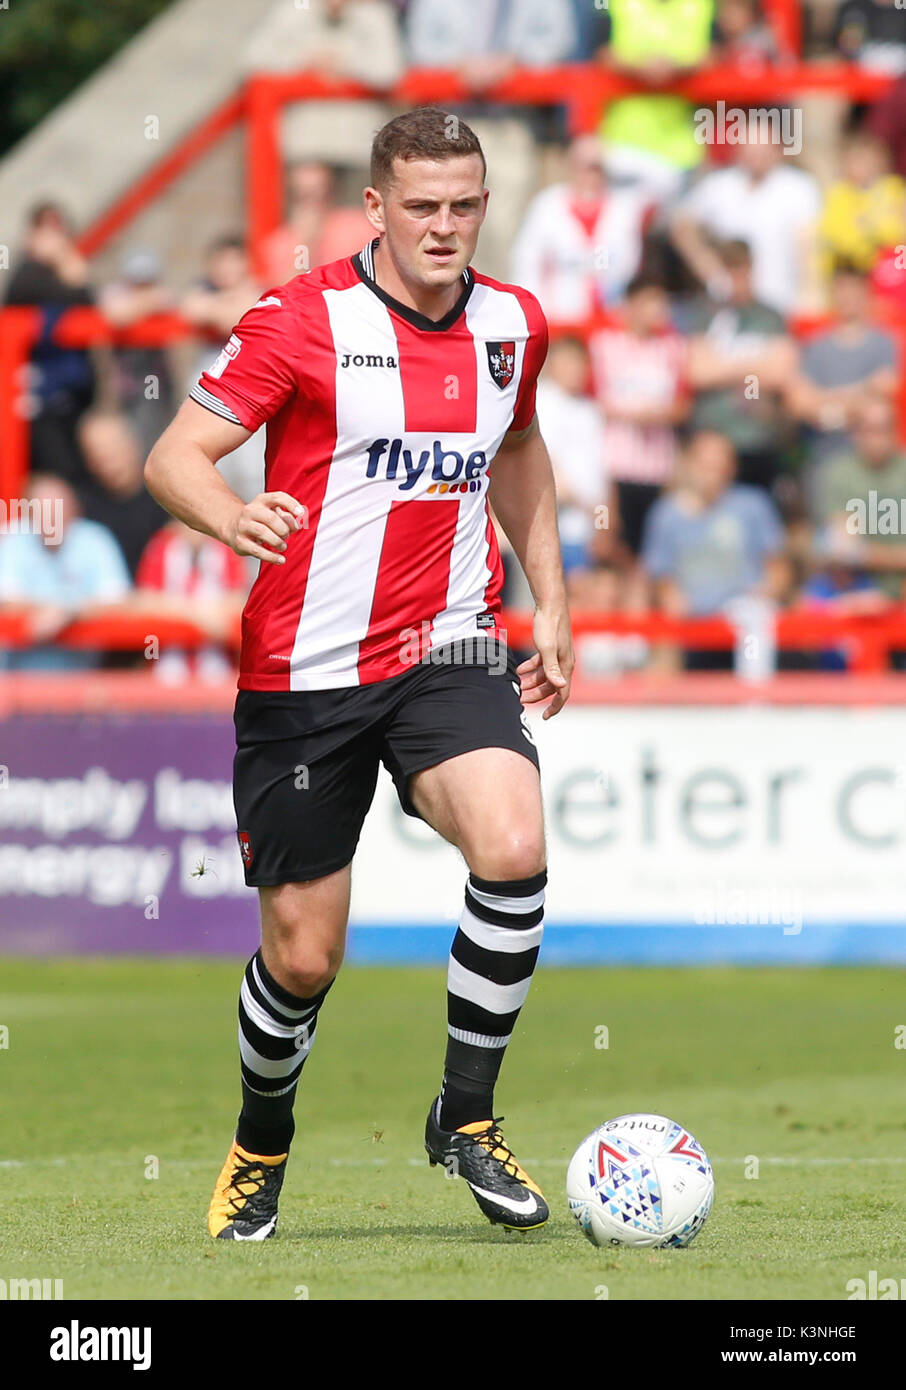 Exeter City's Pierce Sweeney in action during the Sky Bet League Two match at St James Park, Exeter. PRESS ASSOCIATION Photo. Picture date: Saturday September 2, 2017. See PA story SOCCER Exeter. Photo credit should read: Julian Herbert/PA Wire. RESTRICTIONS: No use with unauthorised audio, video, data, fixture lists, club/league logos or 'live' services. Online in-match use limited to 75 images, no video emulation. No use in betting, games or single club/league/player publications. Stock Photo